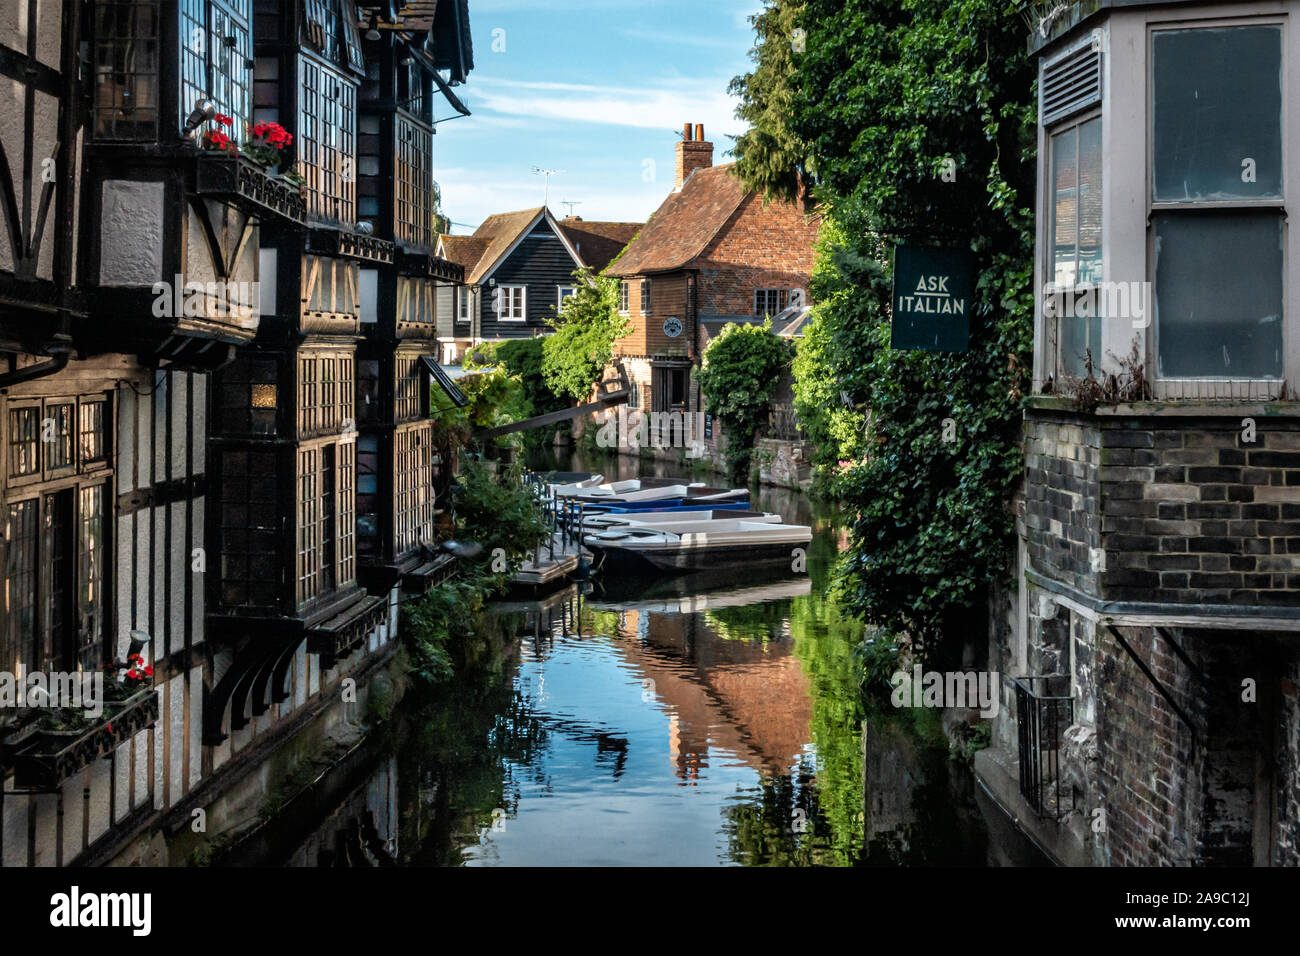 The Weaver's House and boats on the River Stour, which flows through Canterbury, a cathedral city in Kent, southeast England, UK Stock Photo